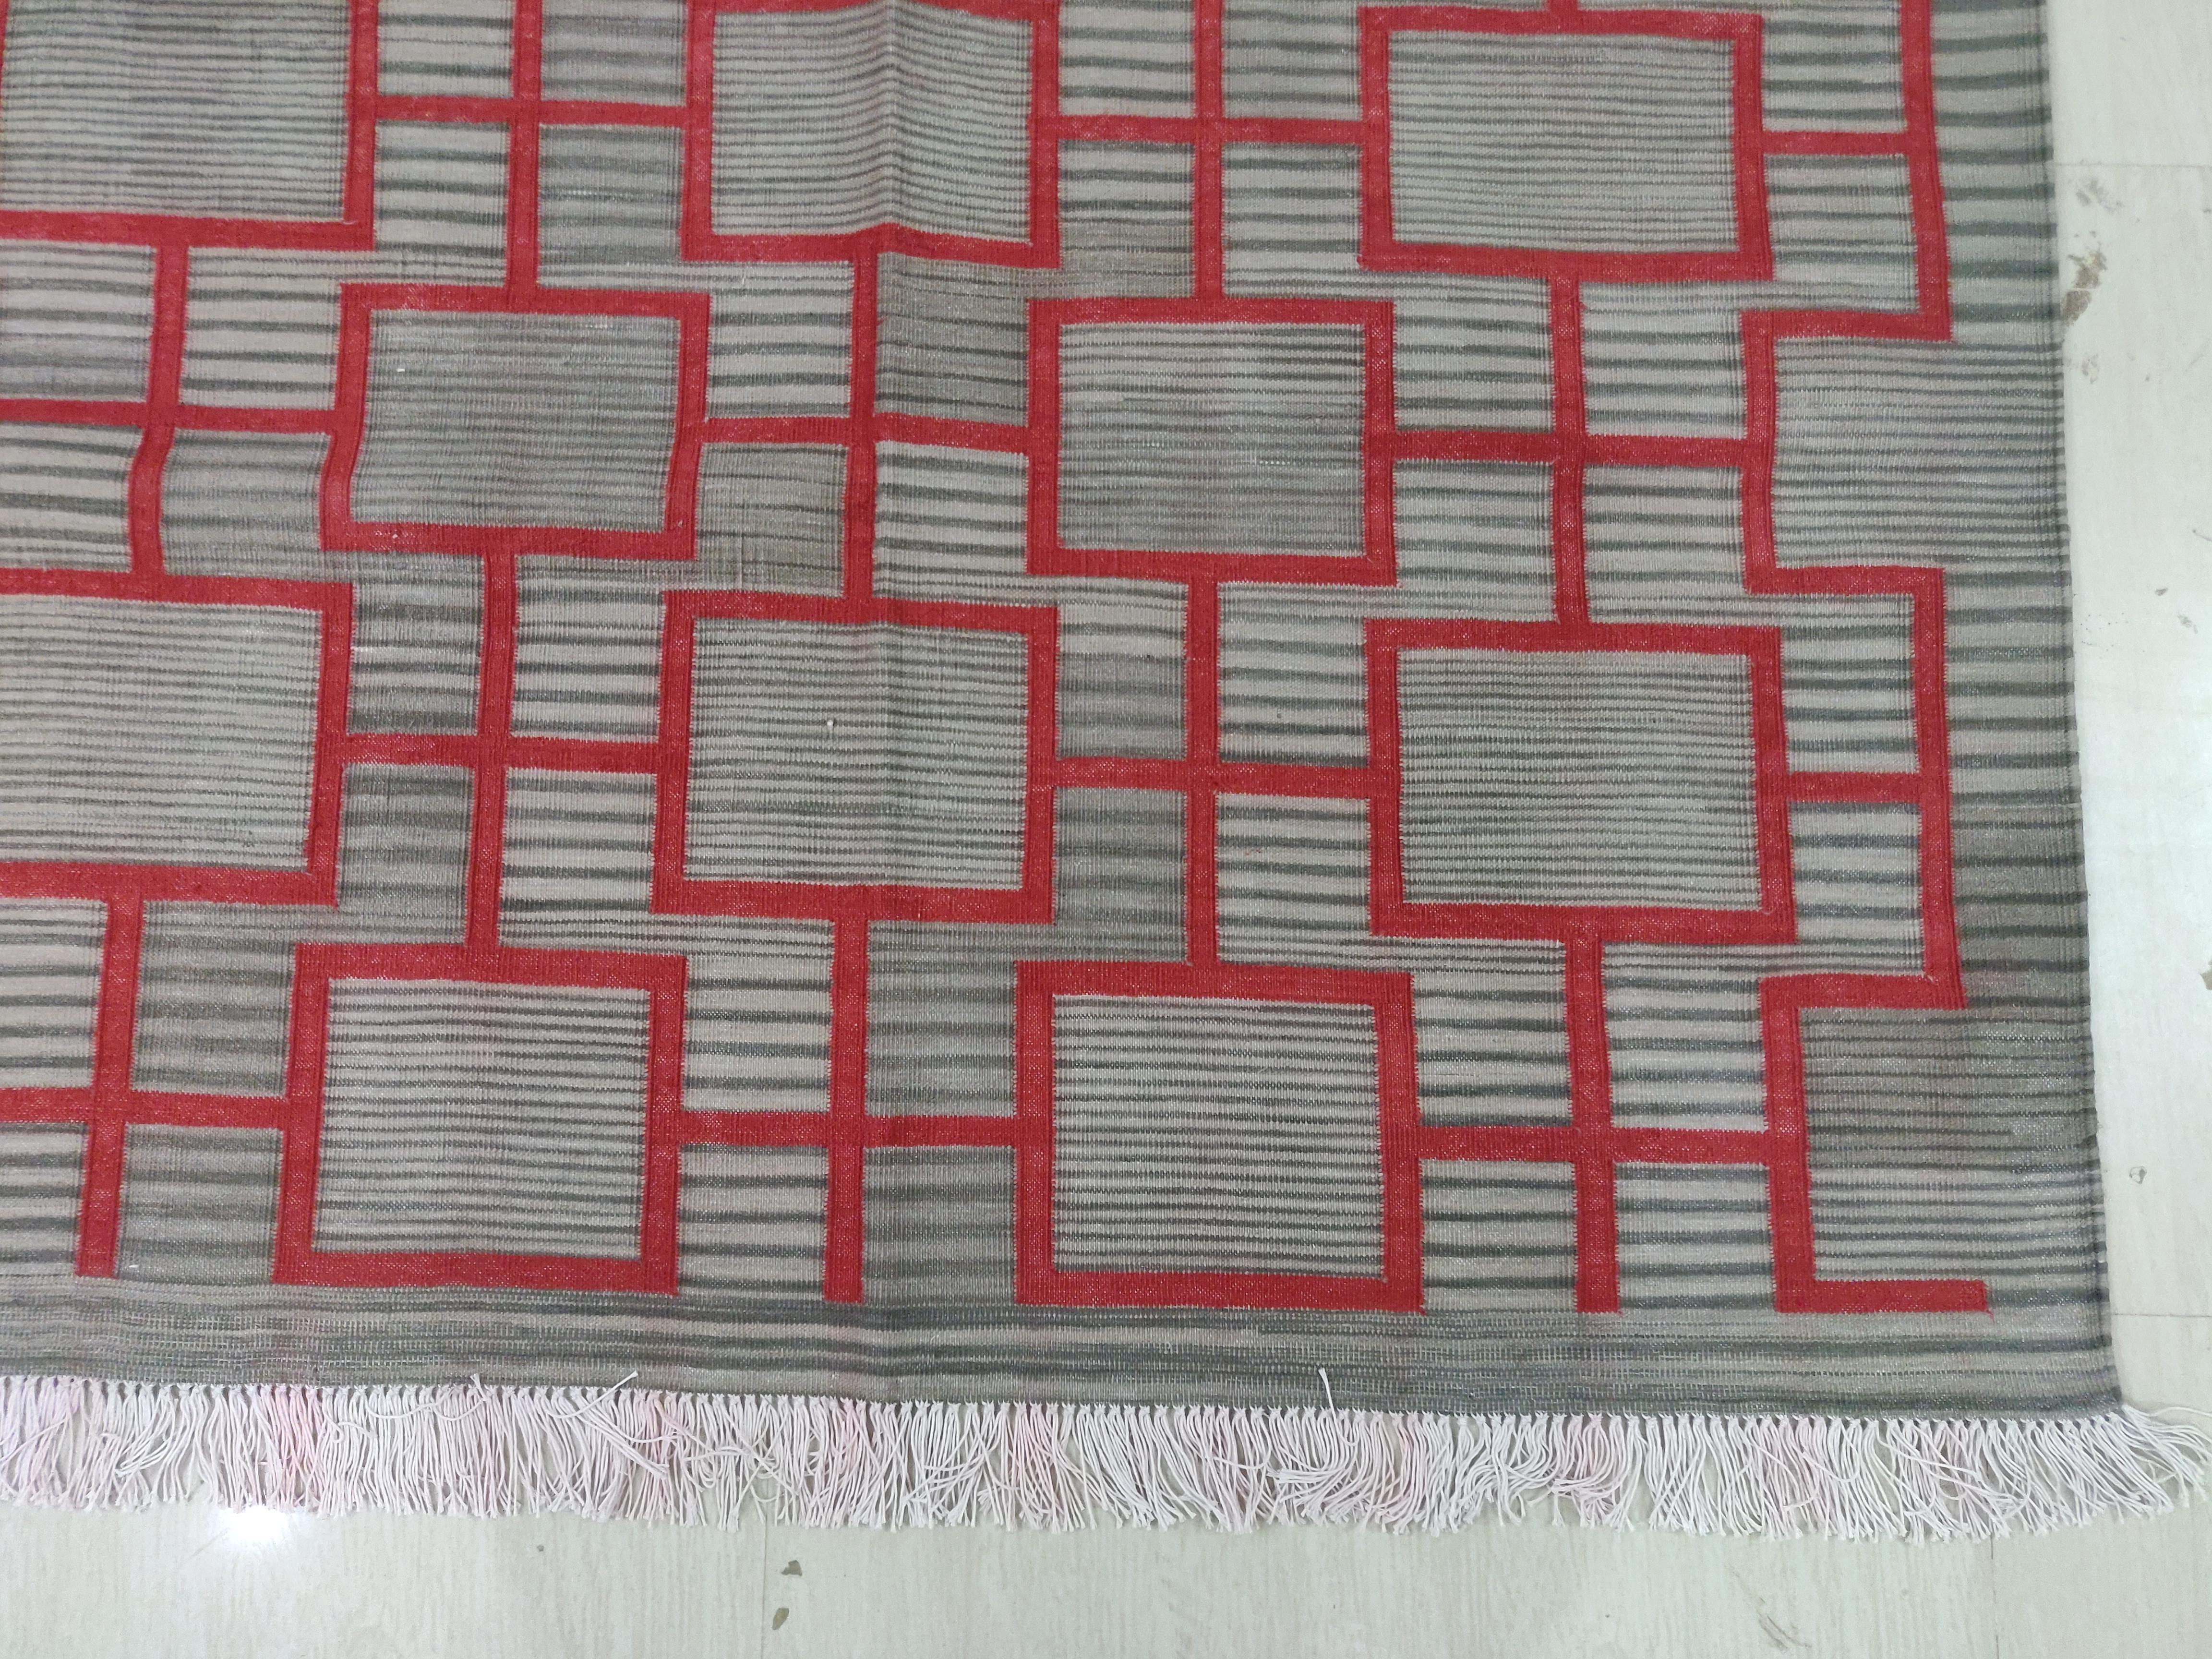 Hand-Woven Handmade Cotton Area Flat Weave Rug, 4x6 Brown And Red Geometric Indian Dhurrie For Sale